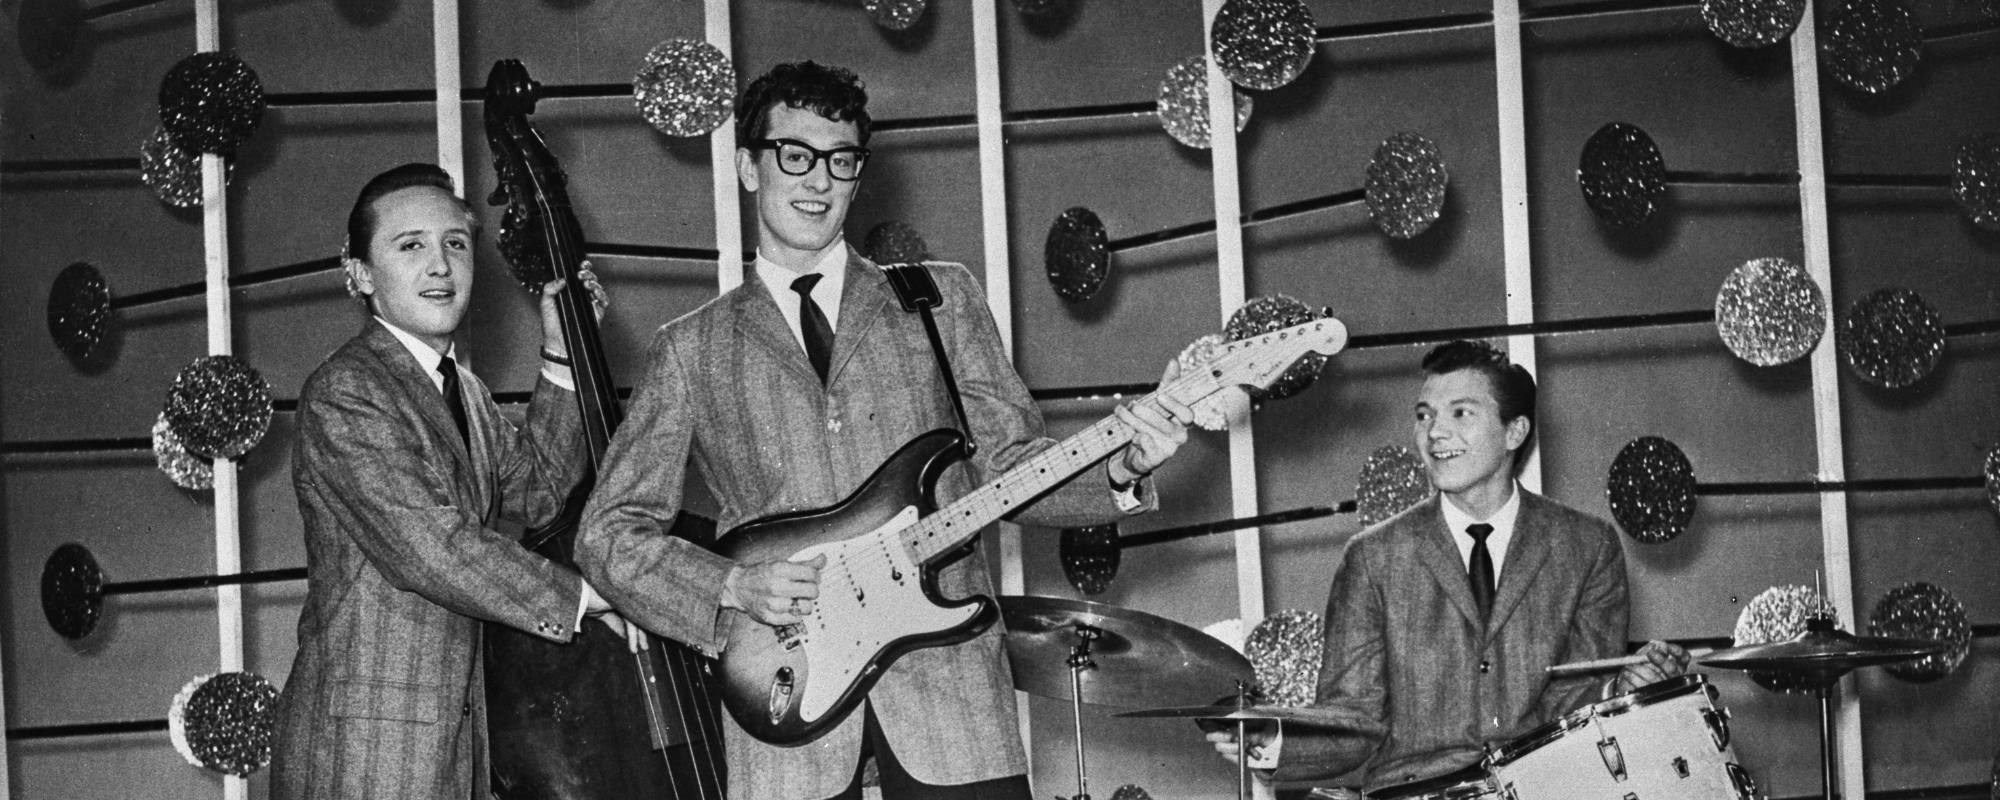 5 Songs You Didn’t Know Were Written by Buddy Holly’s Drummer, Jerry Allison